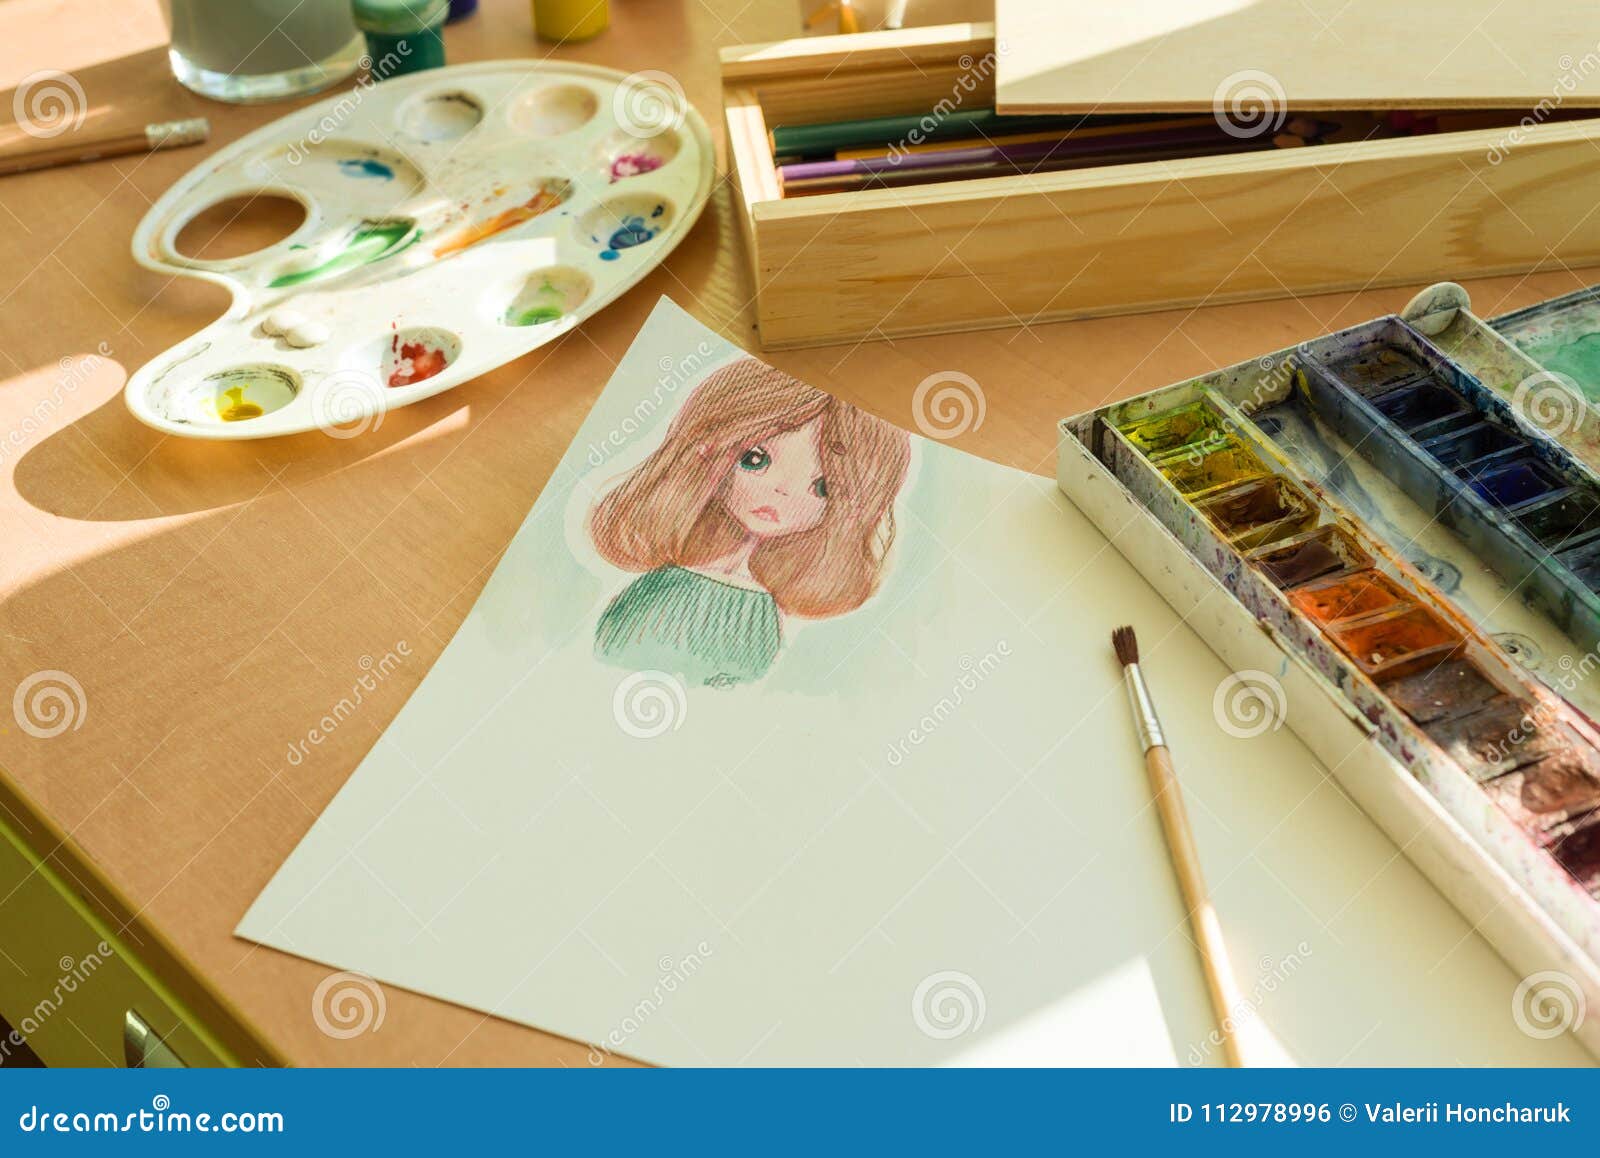 Drawing by Watercolor - Anime Girl, on a Table with Watercolor Paint Brush  Stock Photo - Image of face, hair: 112978996